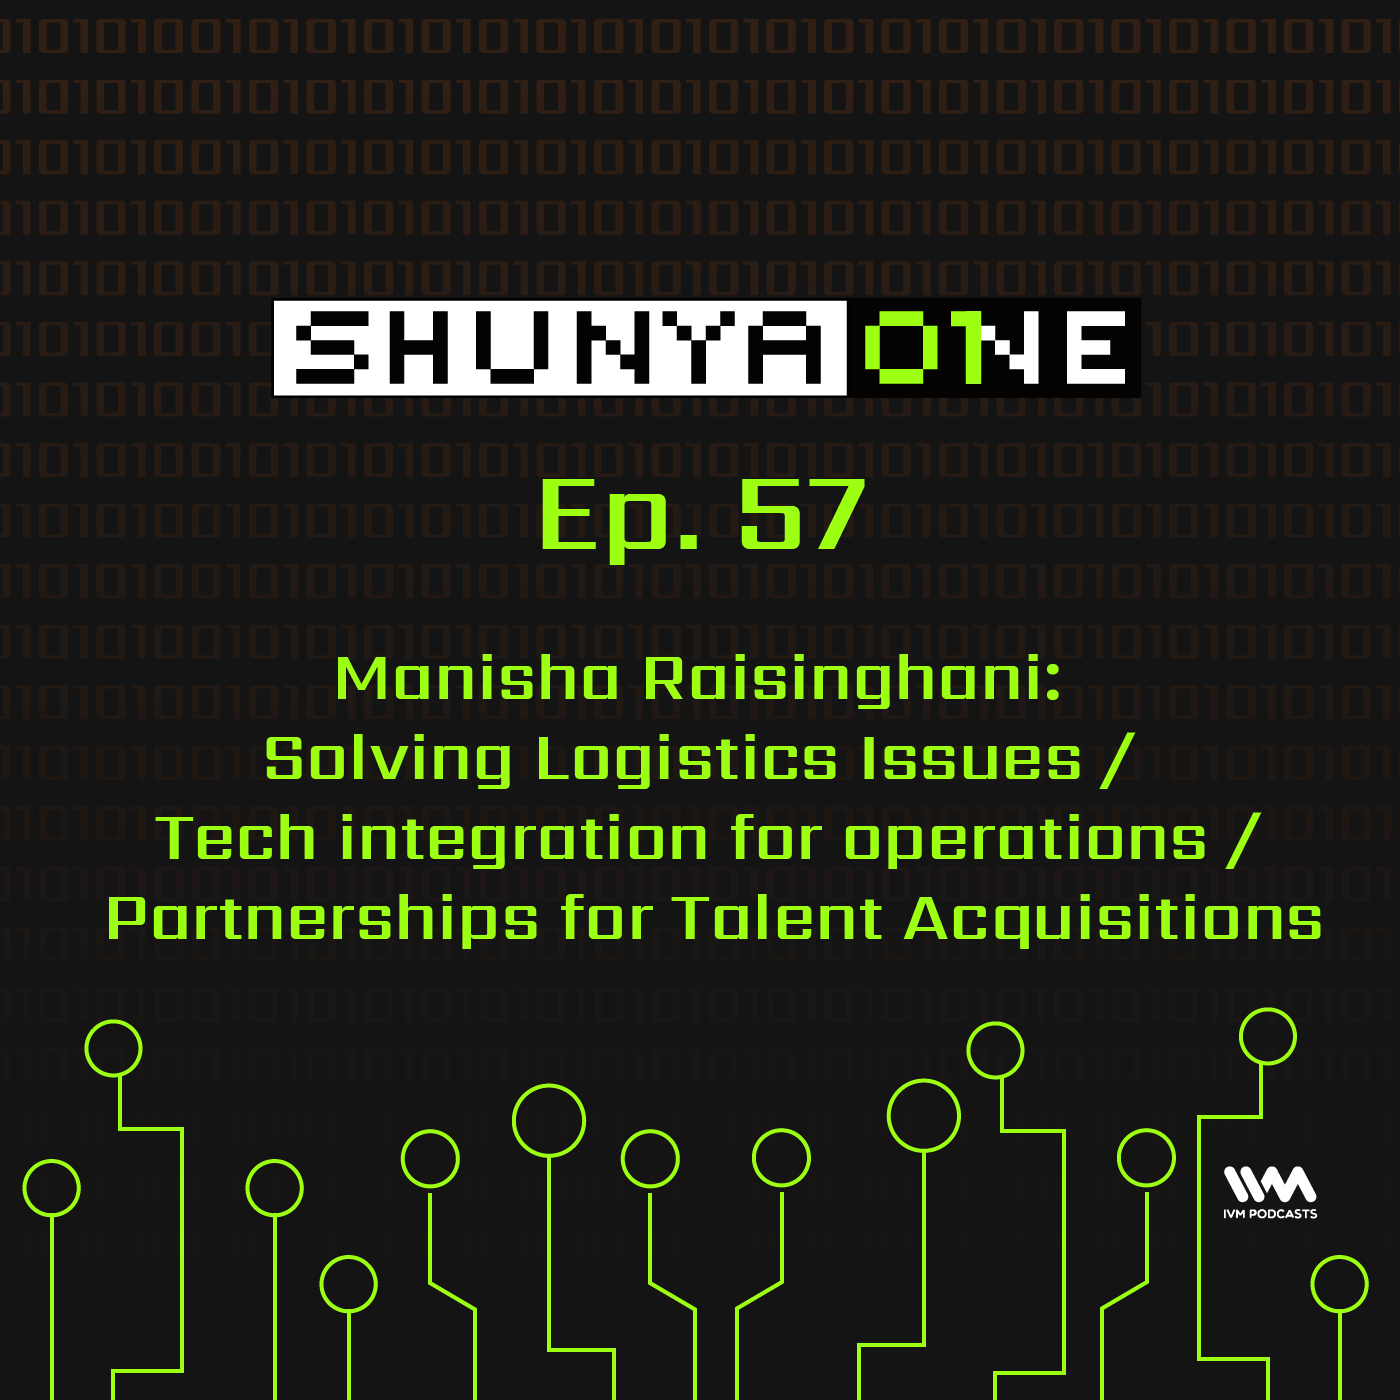 Feat. Manisha Raisinghani: Solving Logistics Issues / Tech Integration for Operations / Partnerships for Talent Acquisitions